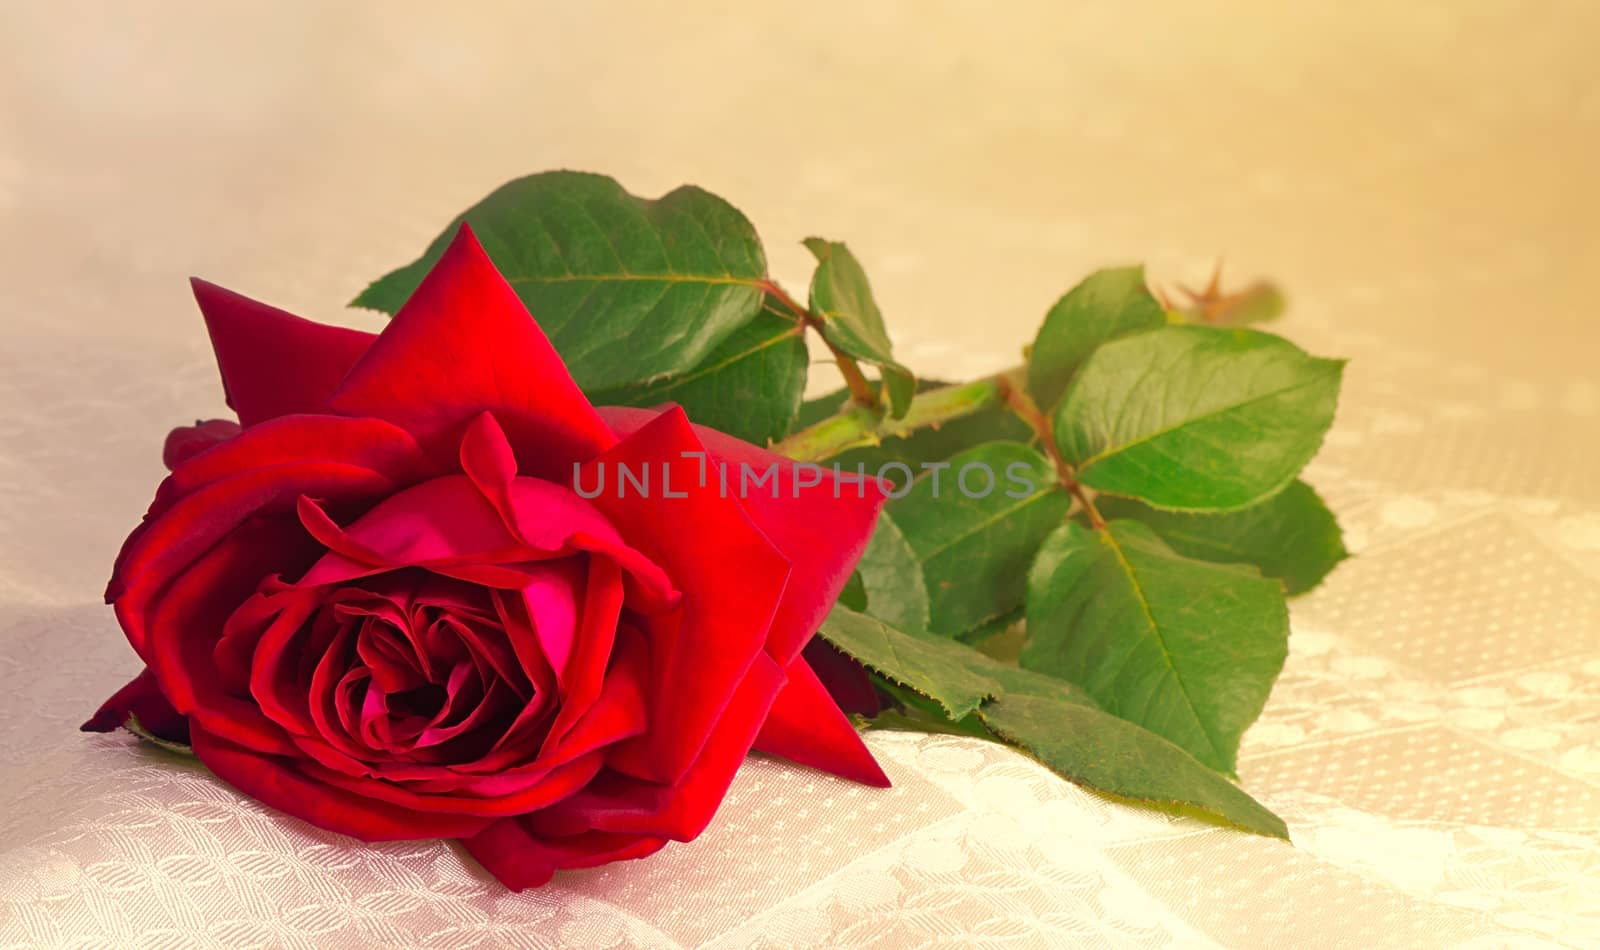 A large red rose with green leaves lies on the silk coverlet.